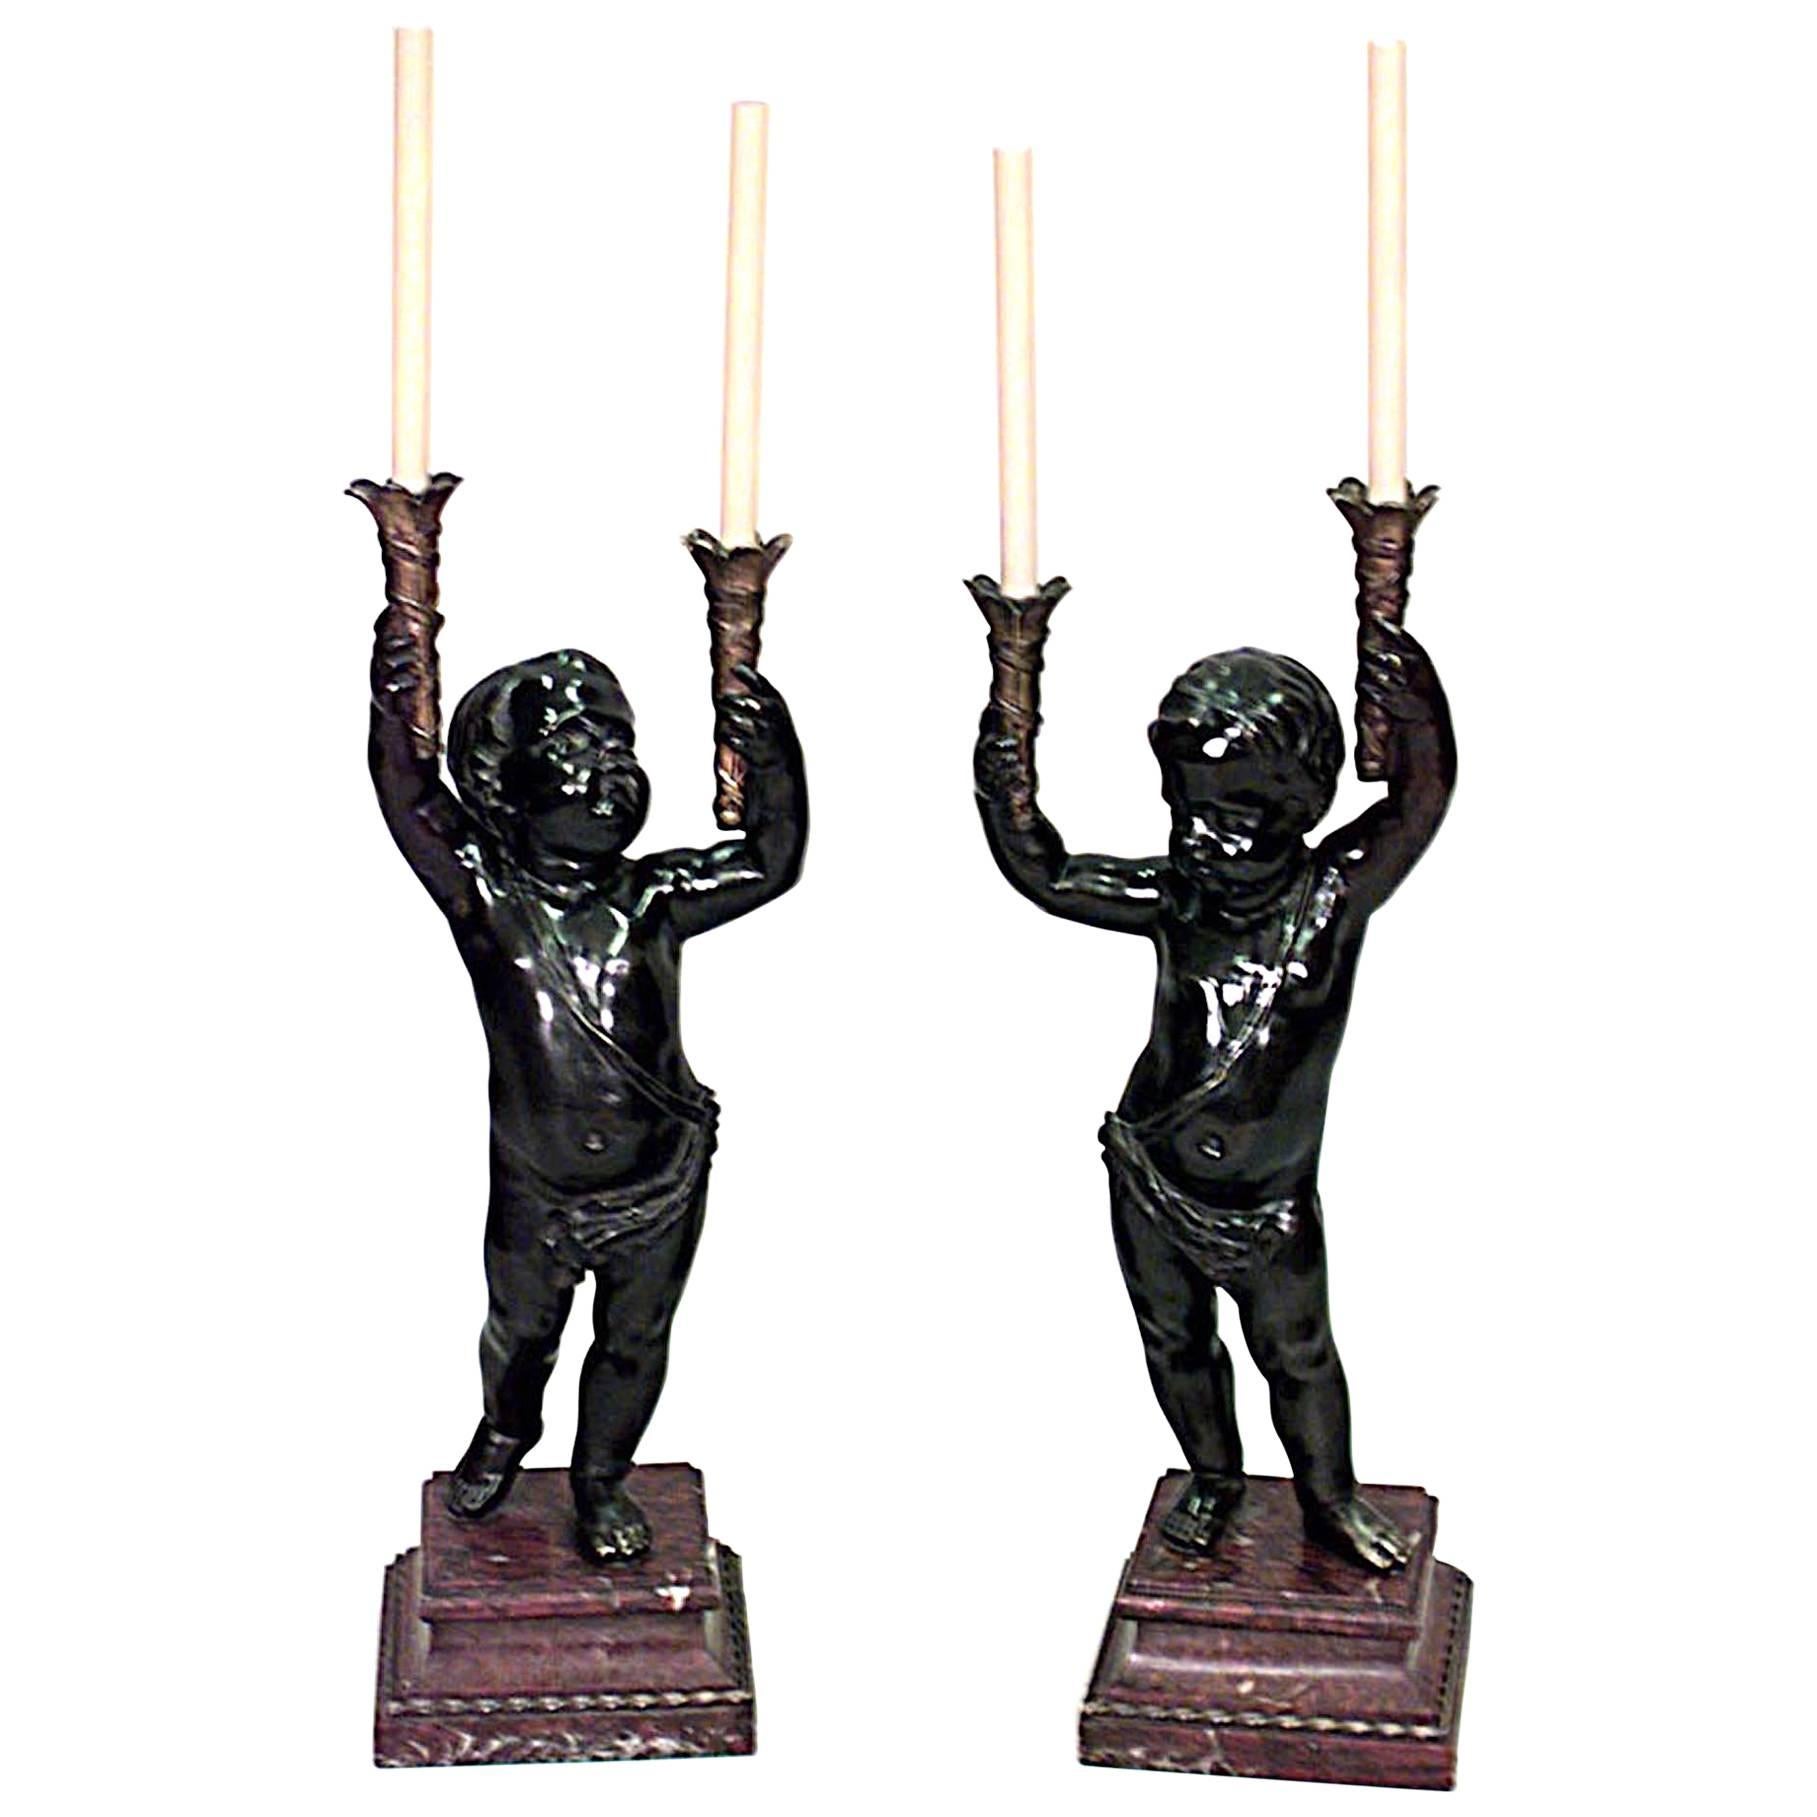 Pair of French Louis XVI Style Cupid Candelabras with Marble Bases